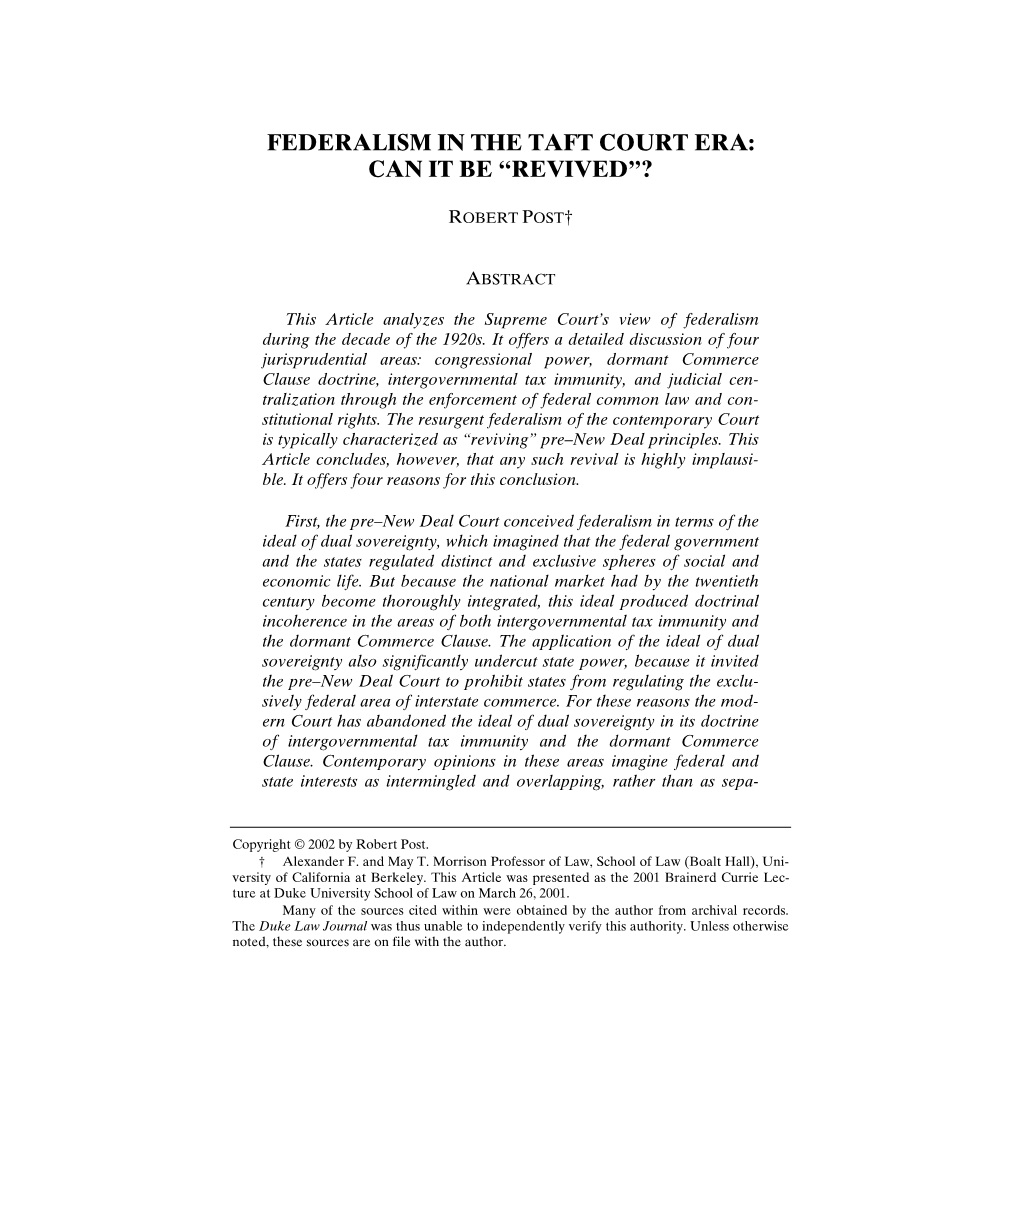 Federalism in the Taft Court Era: Can It Be “Revived”?